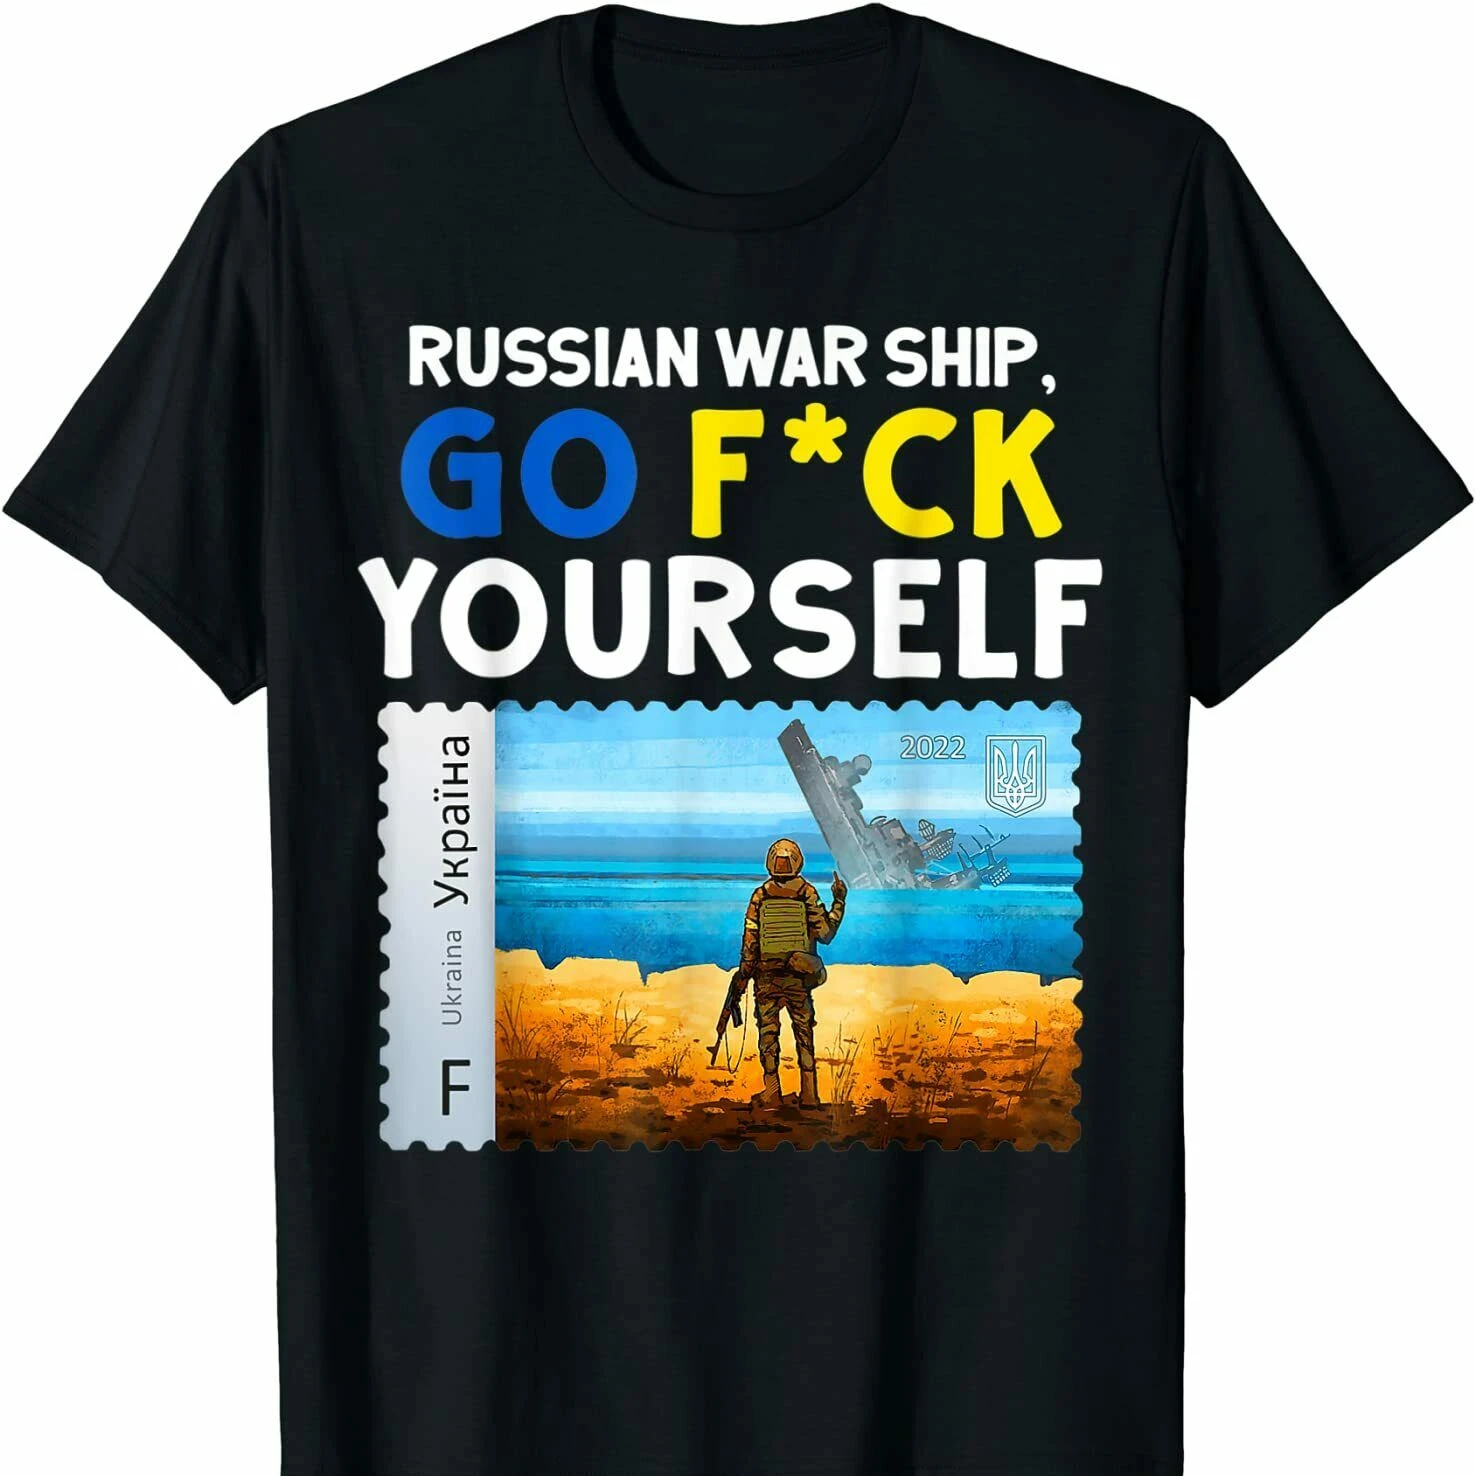 

Middle Finger To Answer Sunken Warship Retro Ukraine Stamp Flag Pride T Shirt. 100% Cotton Casual T-shirts Loose Top Size S-3XL